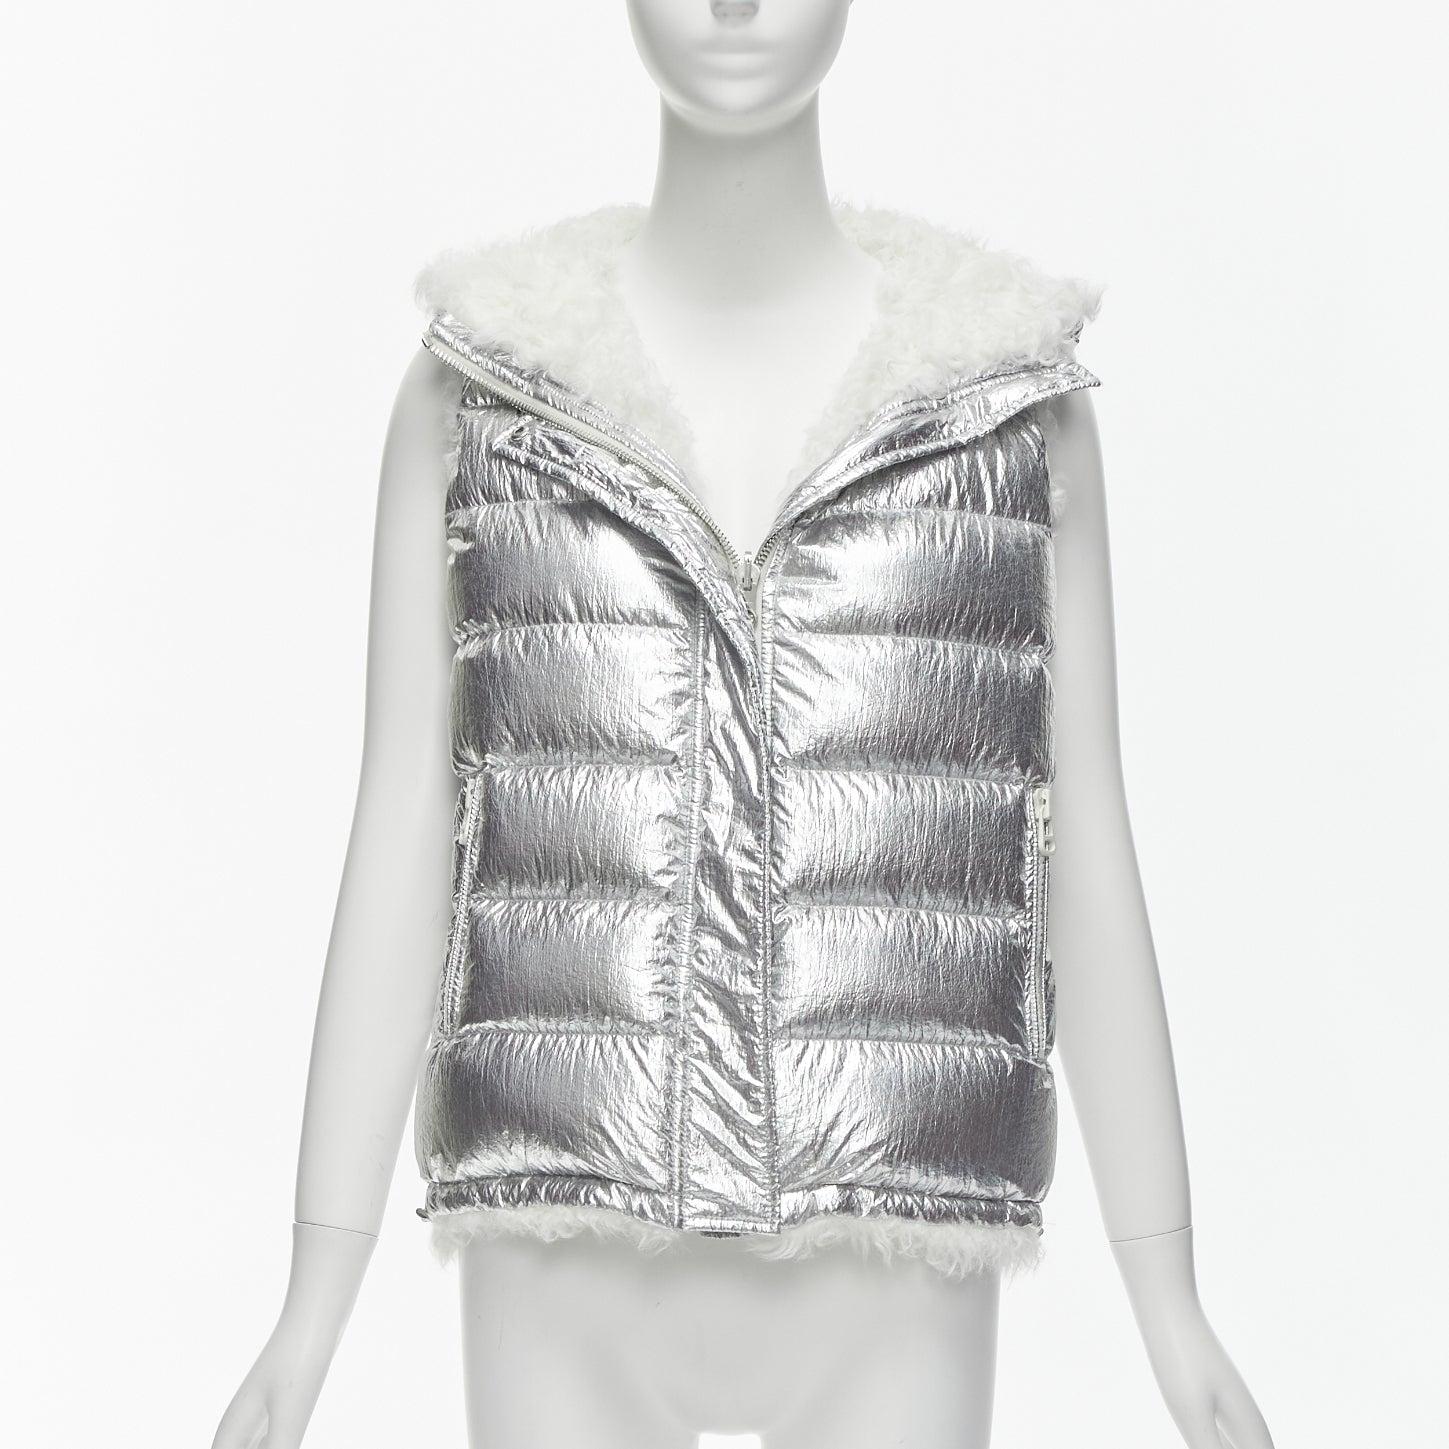 YVES SALOMON ARMY Reversible metallic silver white lamb shearling puffer vest FR36 S
Reference: AAWC/A00720
Brand: Yves Salomon
Collection: ARMY
Material: Nylon, Shearling
Color: Silver, White
Pattern: Solid
Closure: Zip
Lining: White Fur
Extra